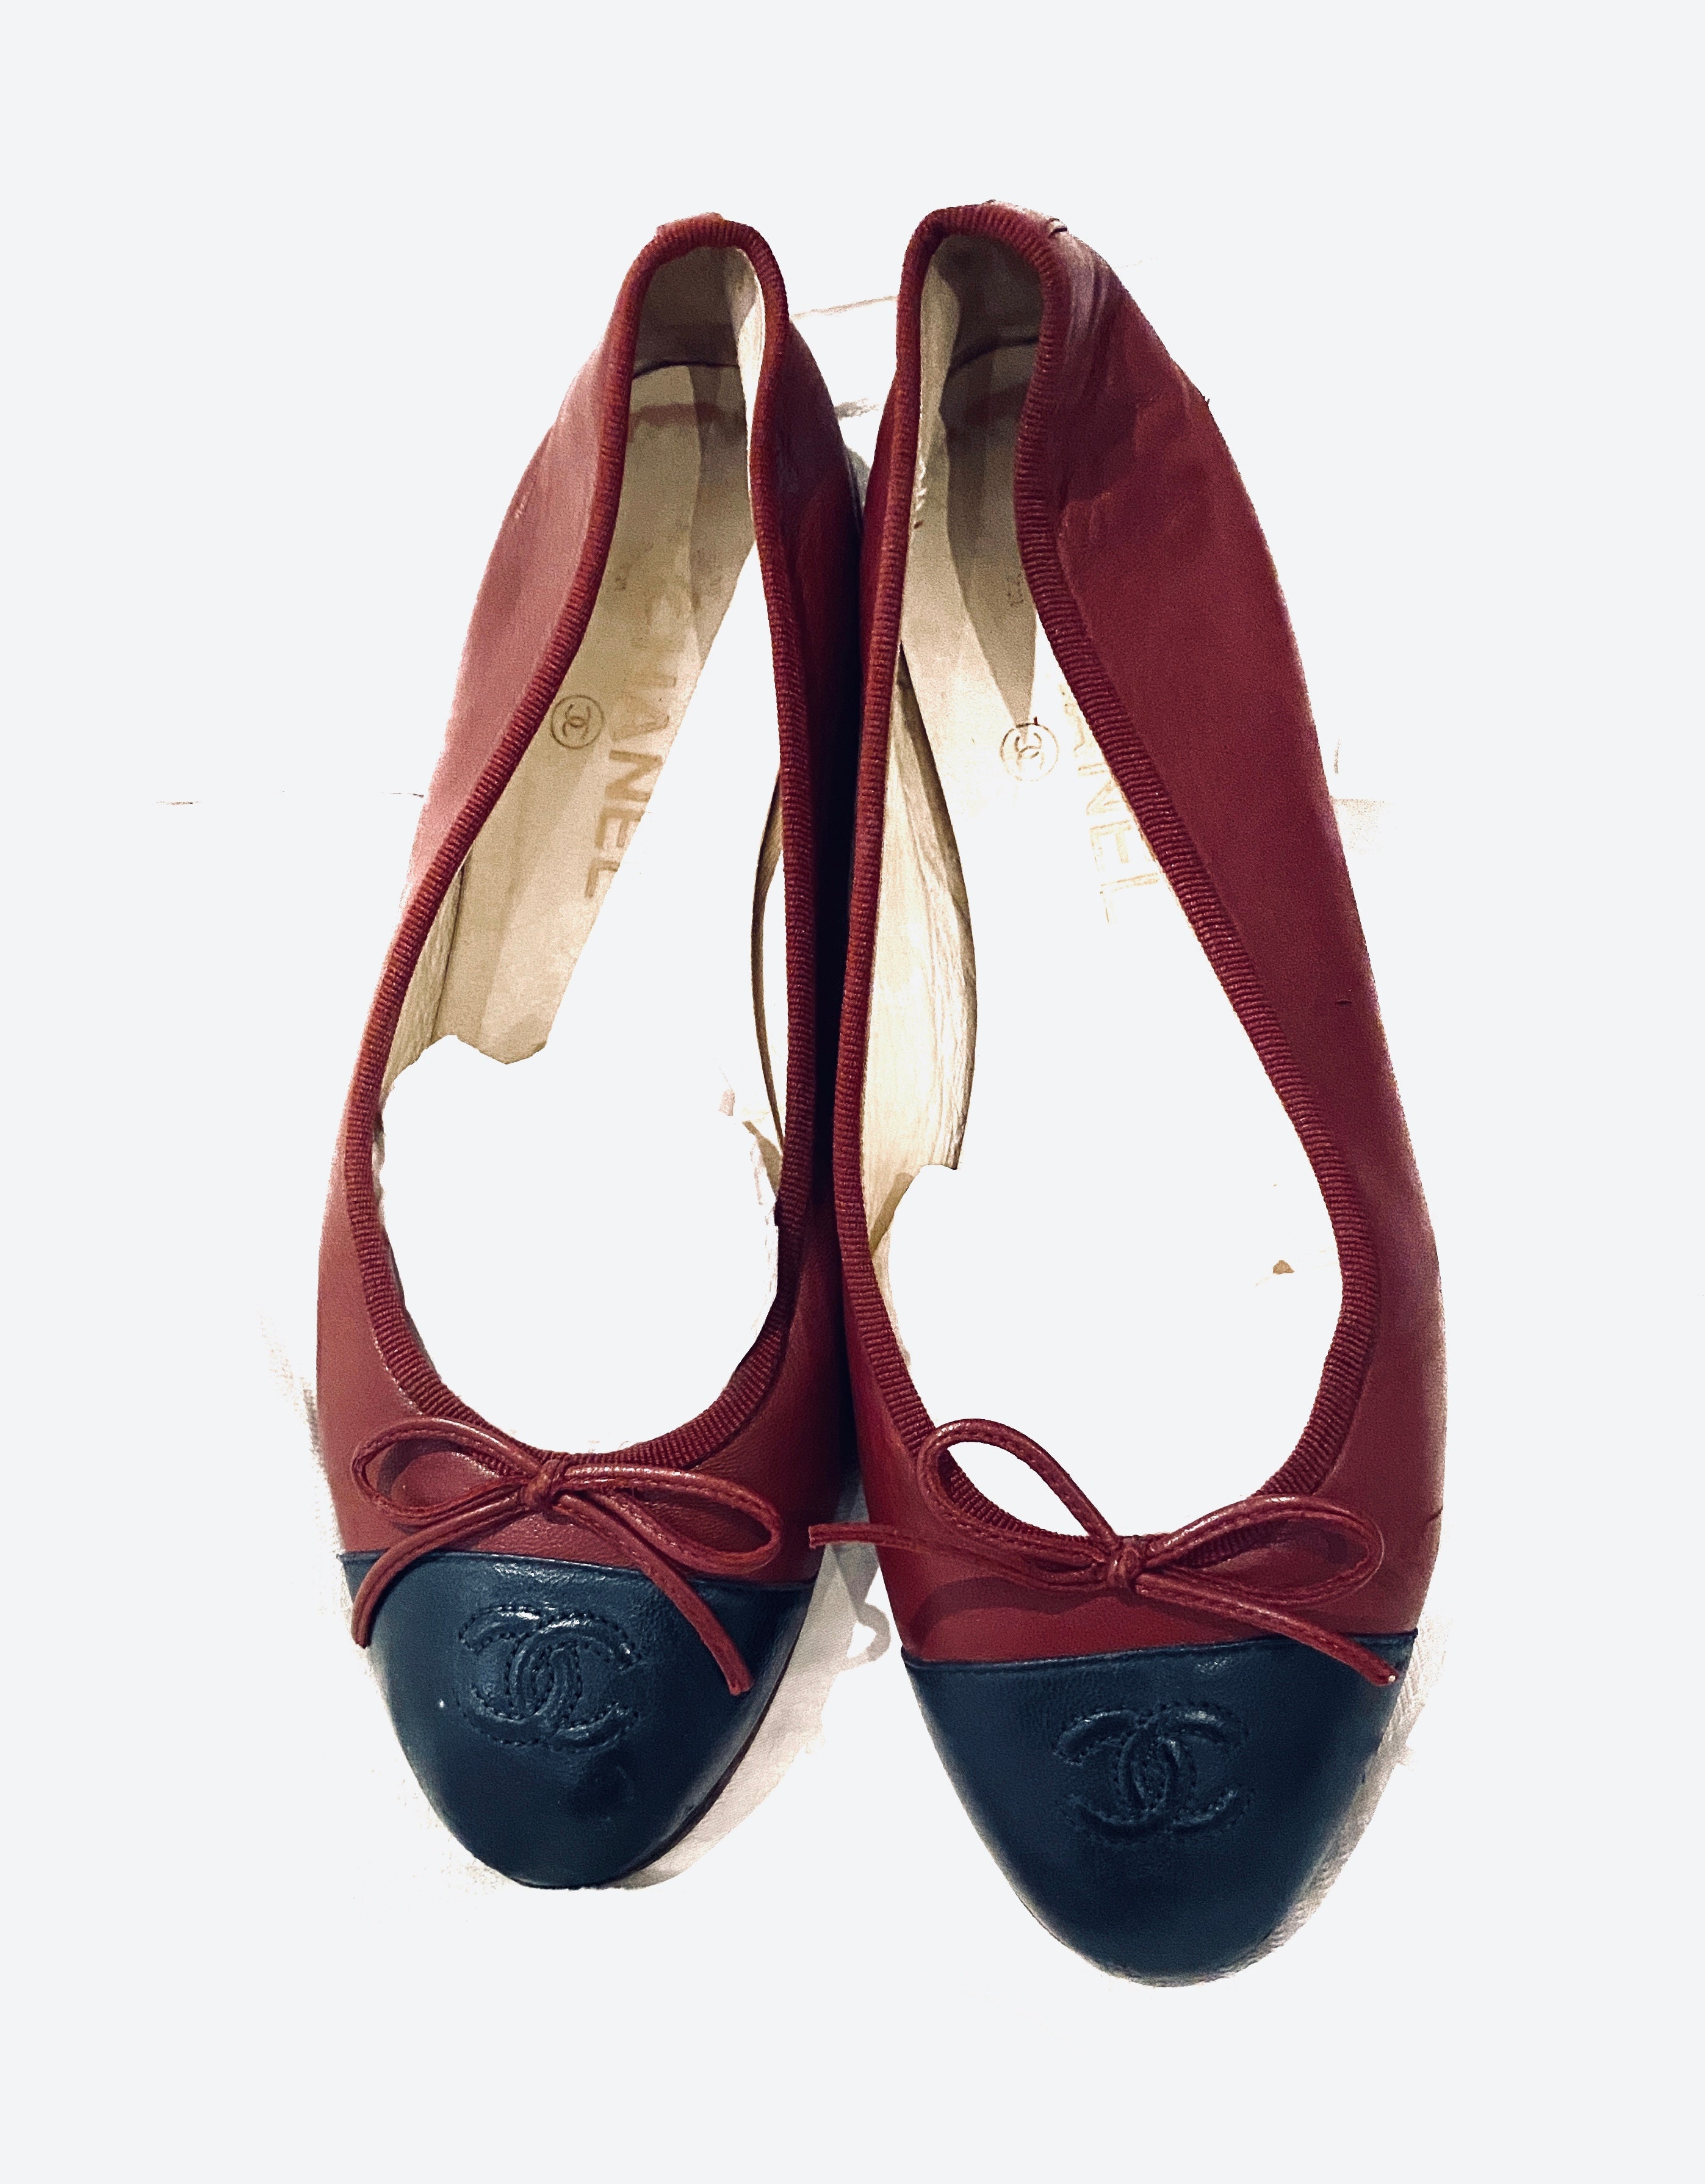 chanel ballet flats, burgundy and black leather, with CC logo and ribbon.